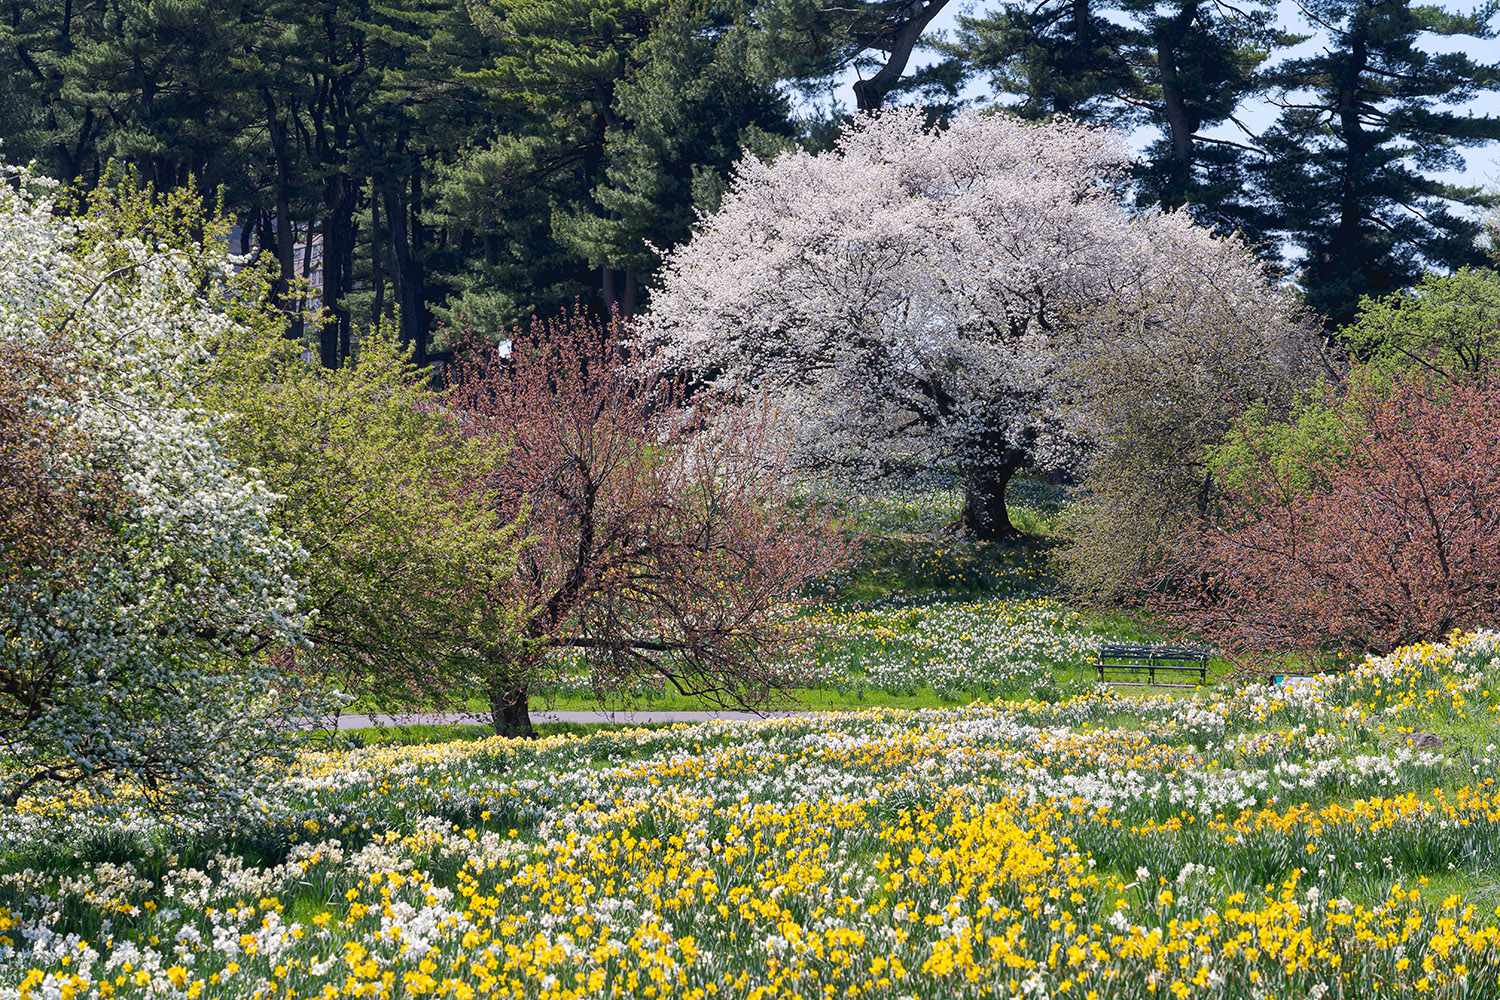 An abundance of white and yellow flowers blooms on a lawn punctuated with crabapple trees and blooming cherry blossom trees.